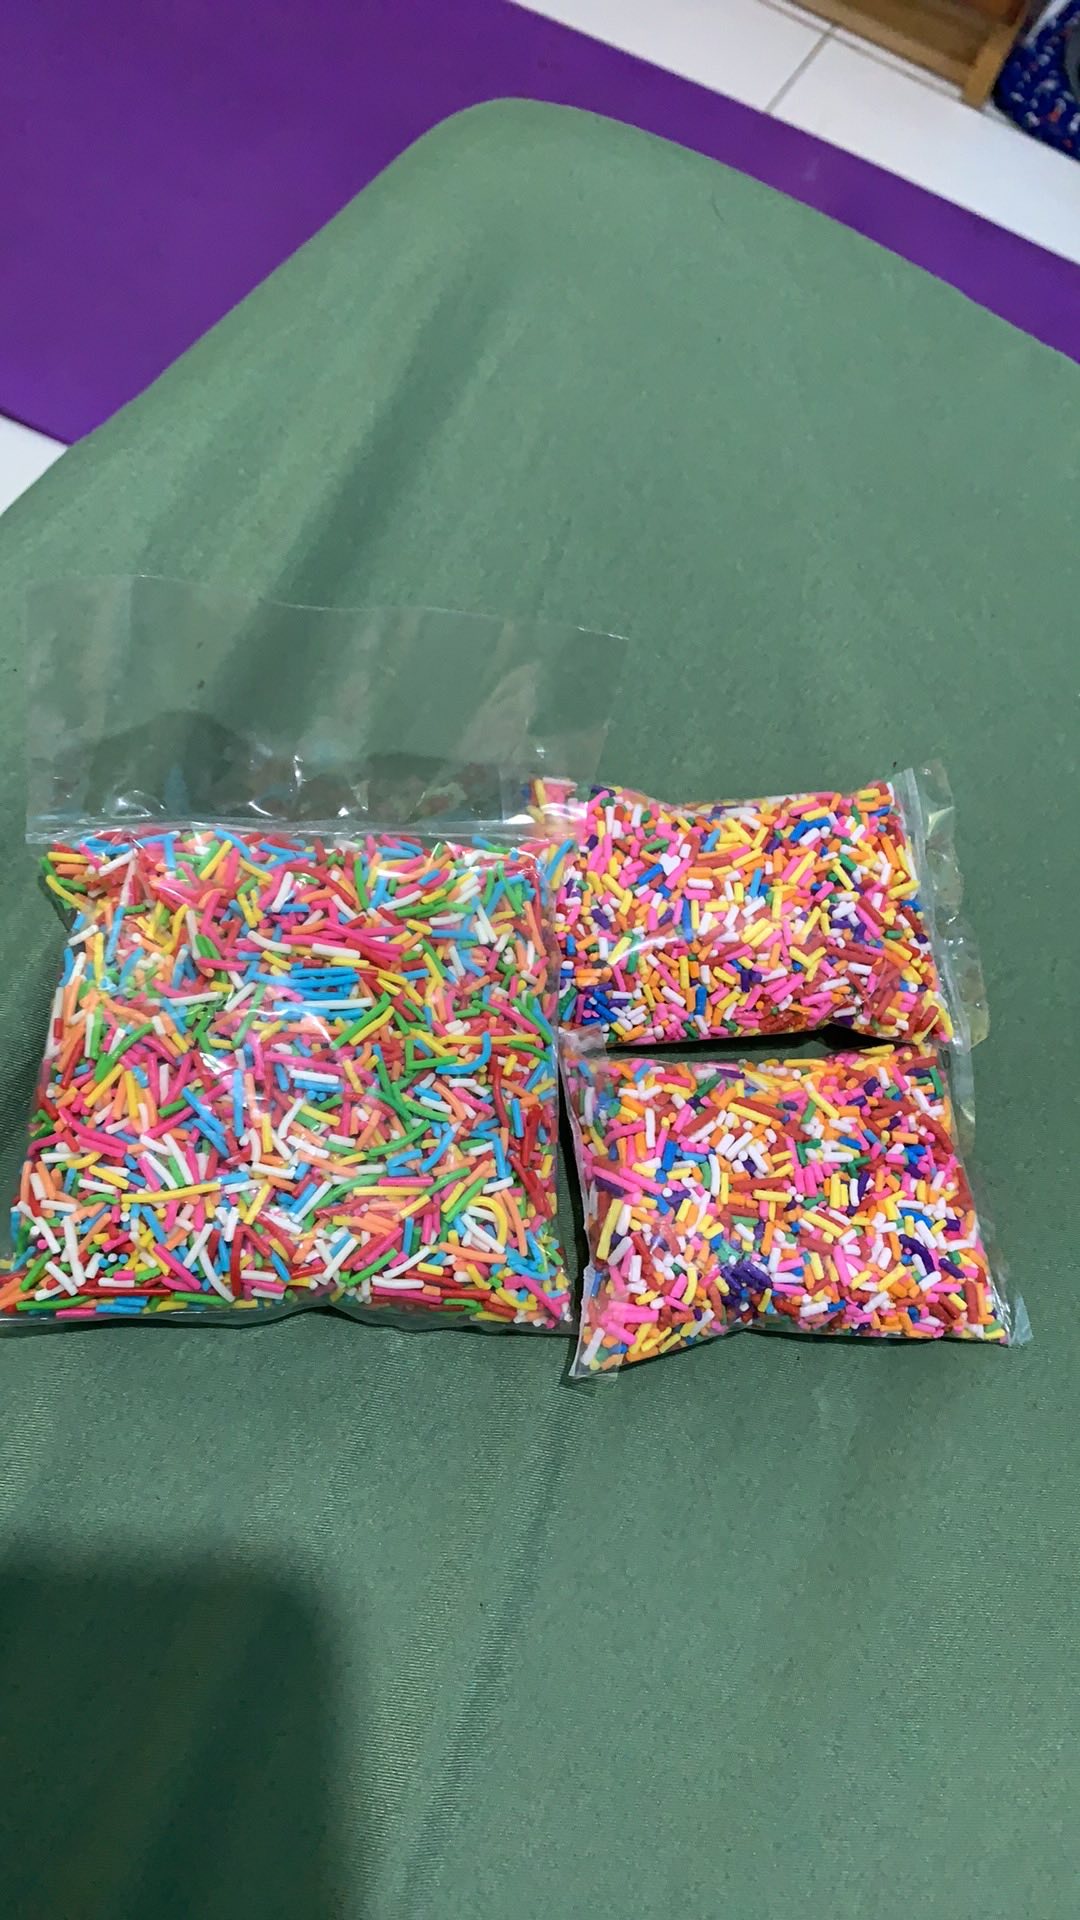 EDIBLE SPRINKLES WITH DIFFERENT COLORS 50G/100G | Shopee ...